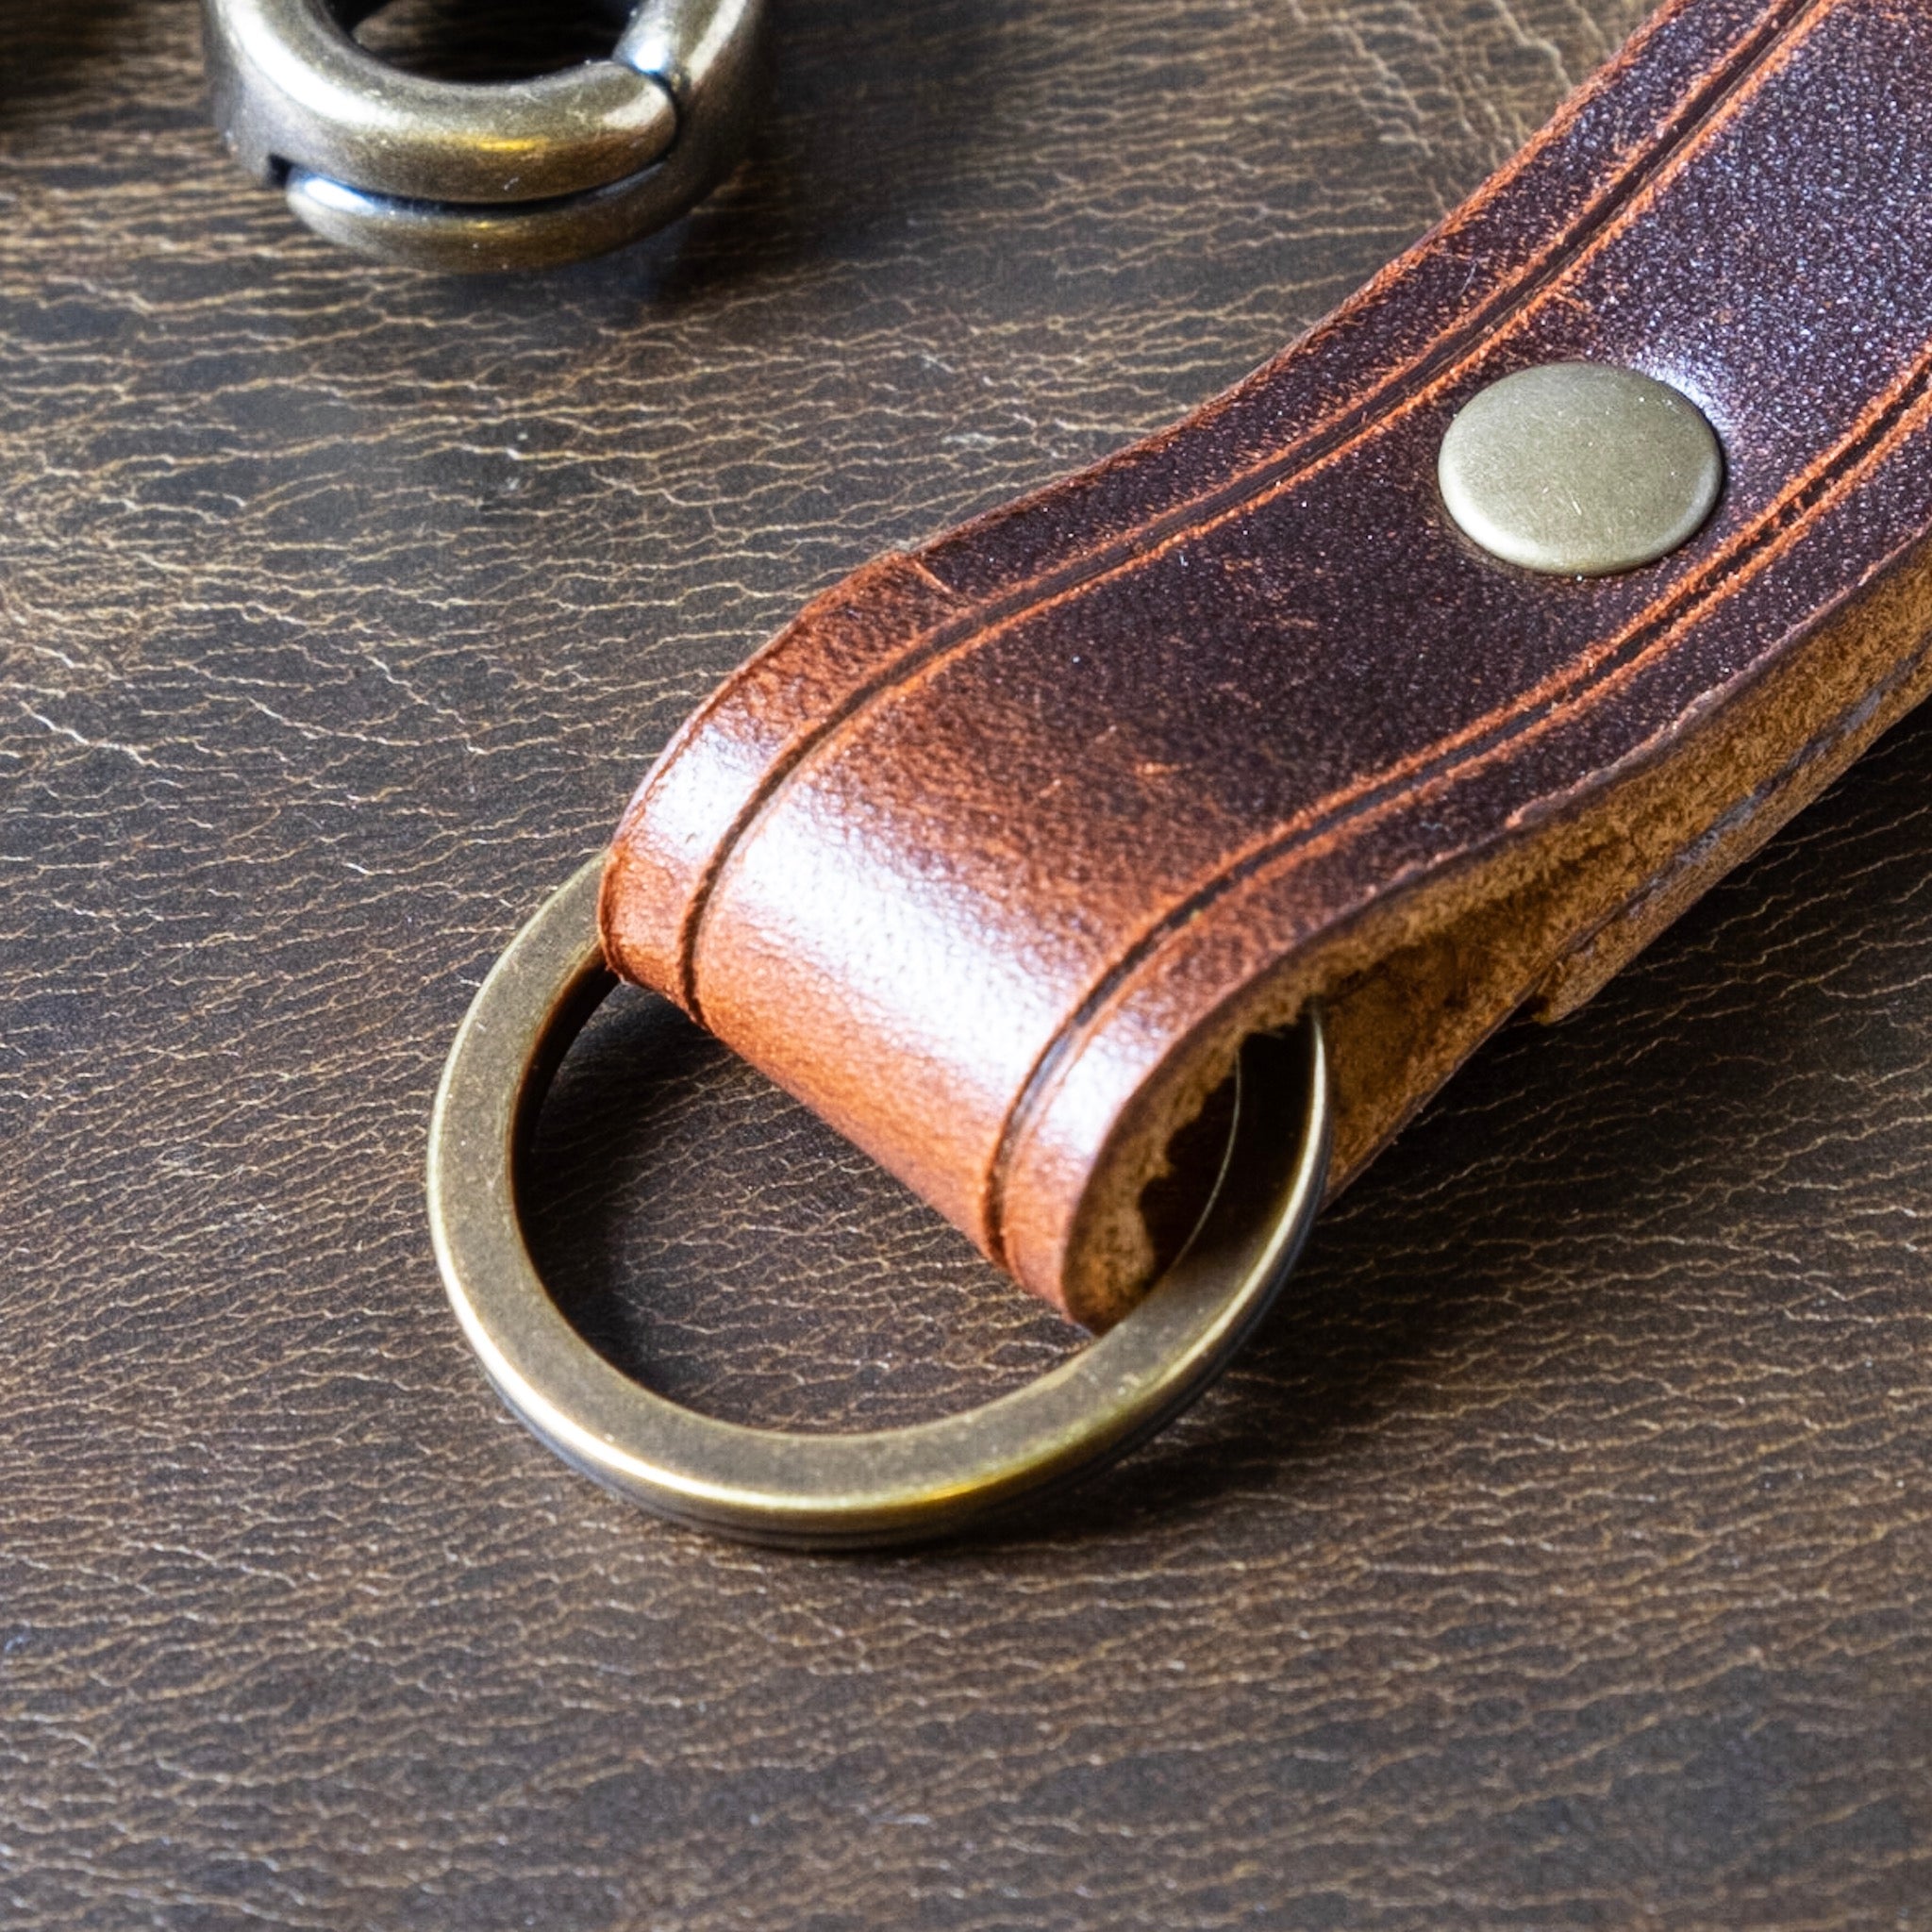 Key Fob Strap and Keyring: Maine Made Accessories